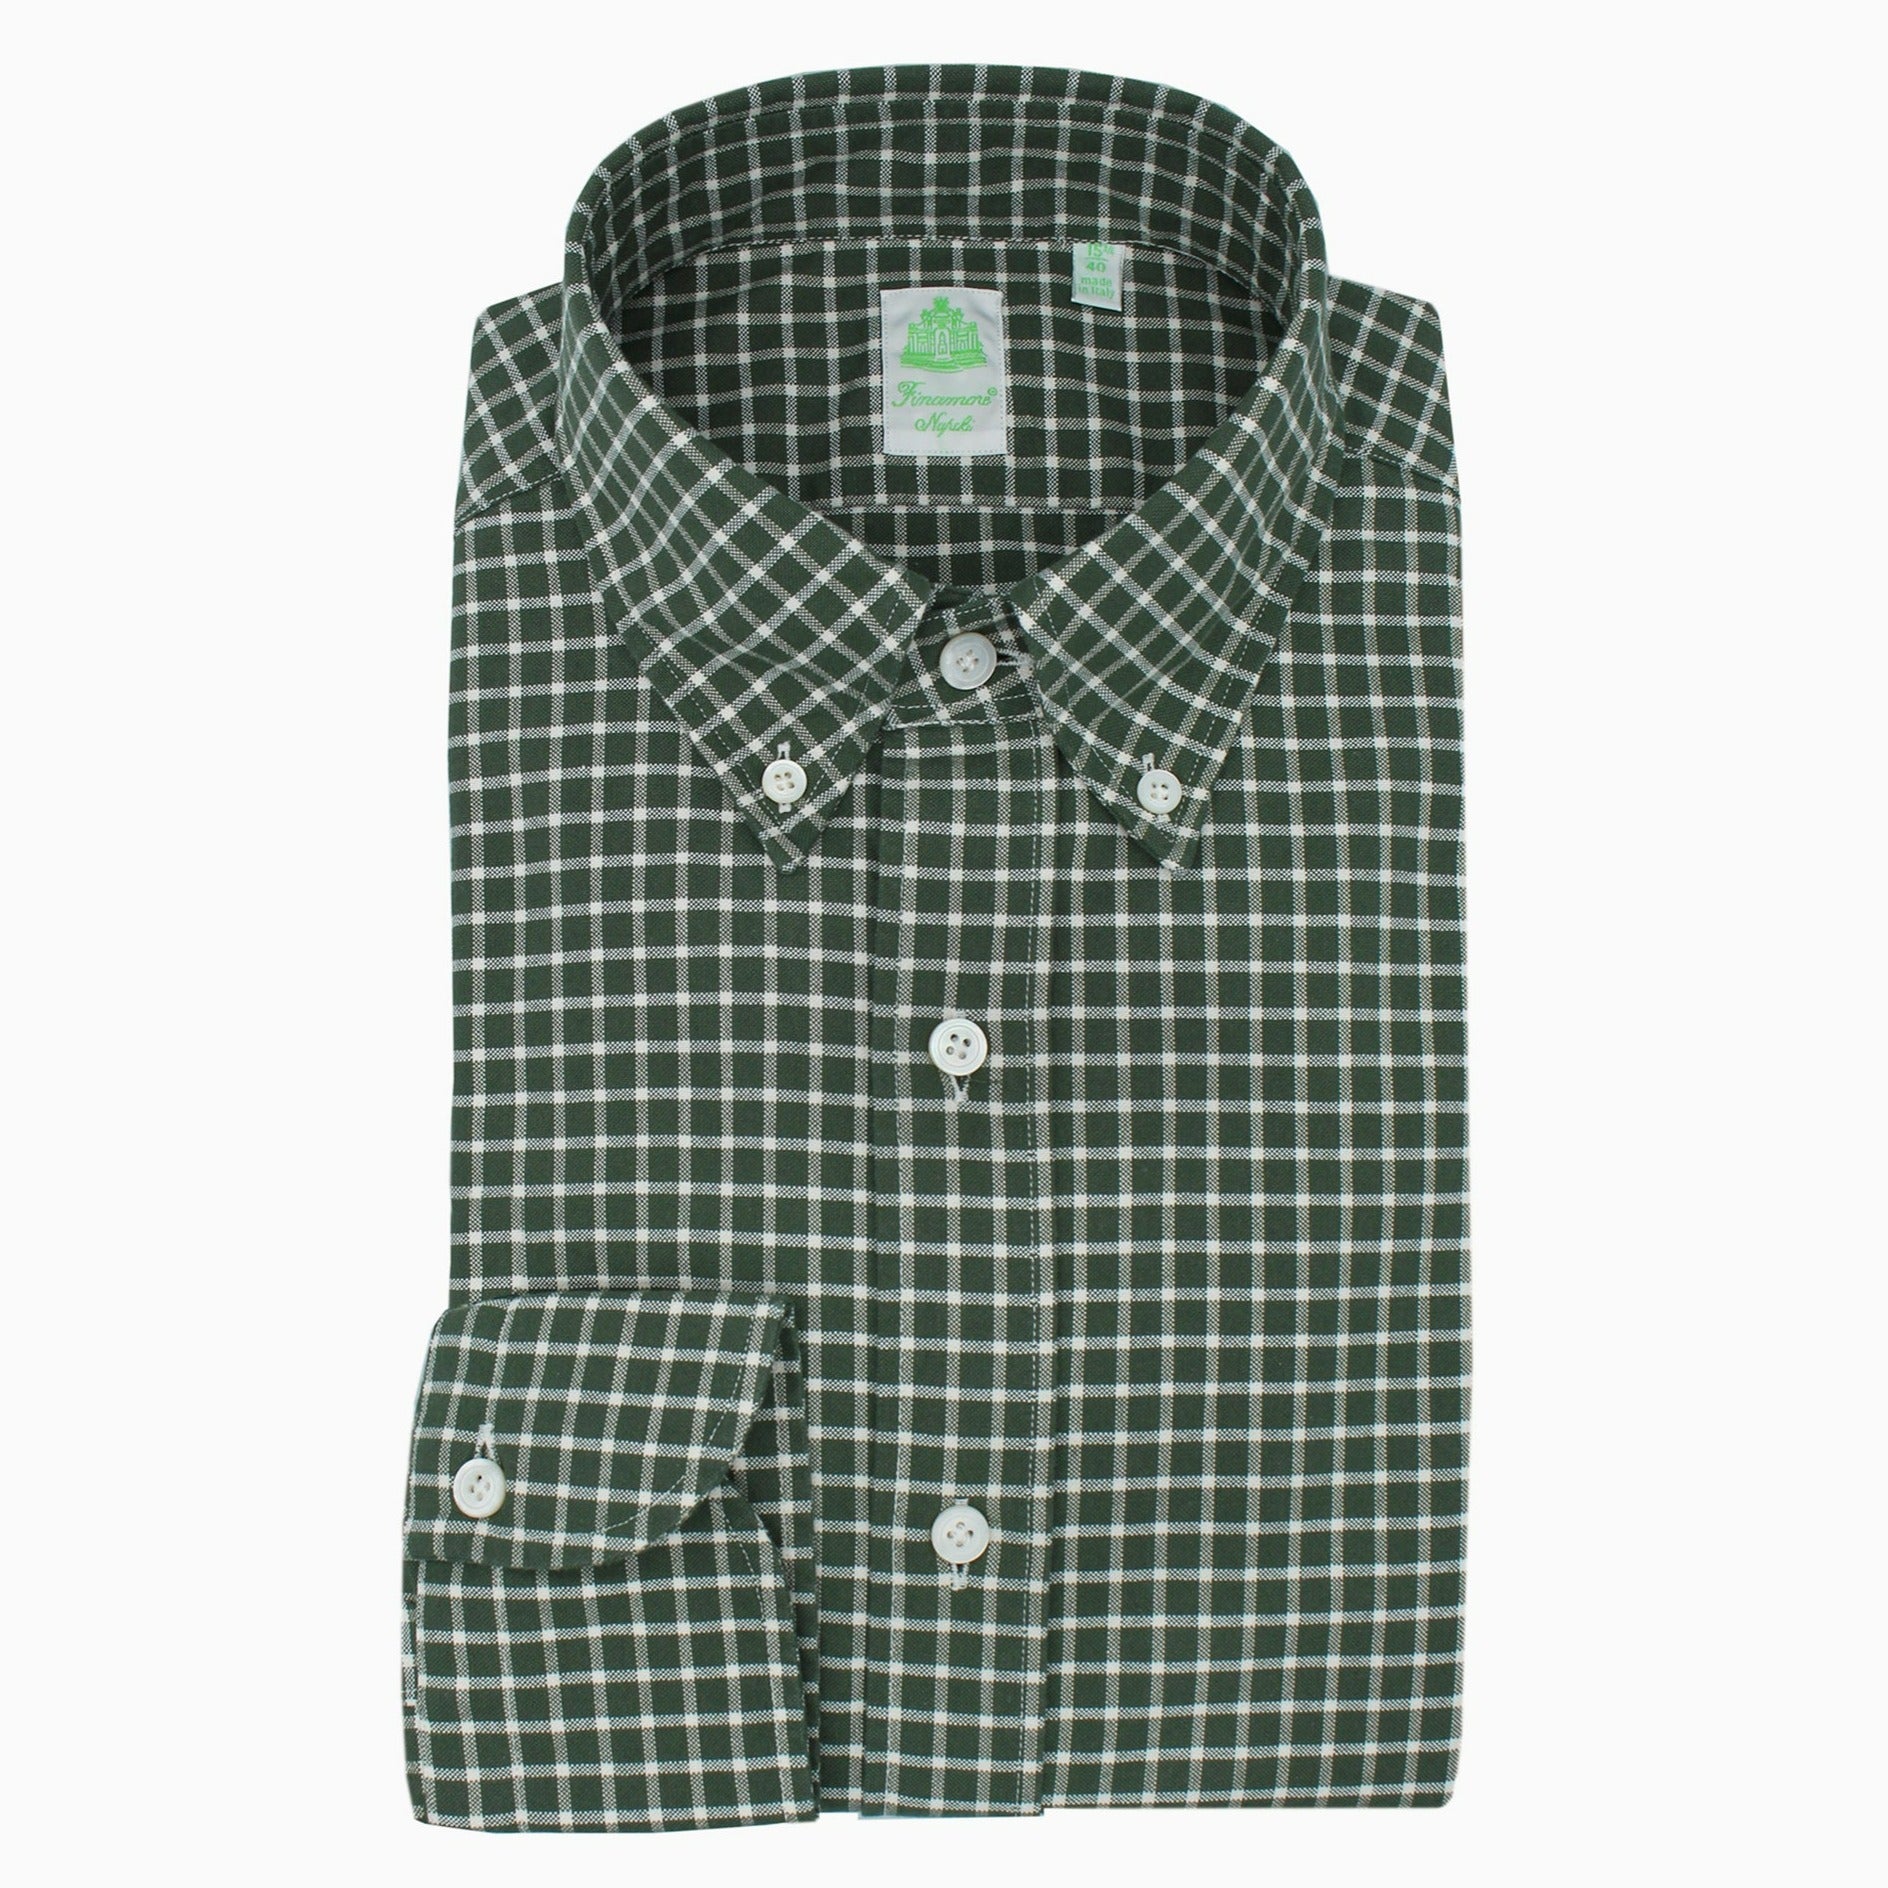 Toledo slim fit sport shirt in green checked cotton